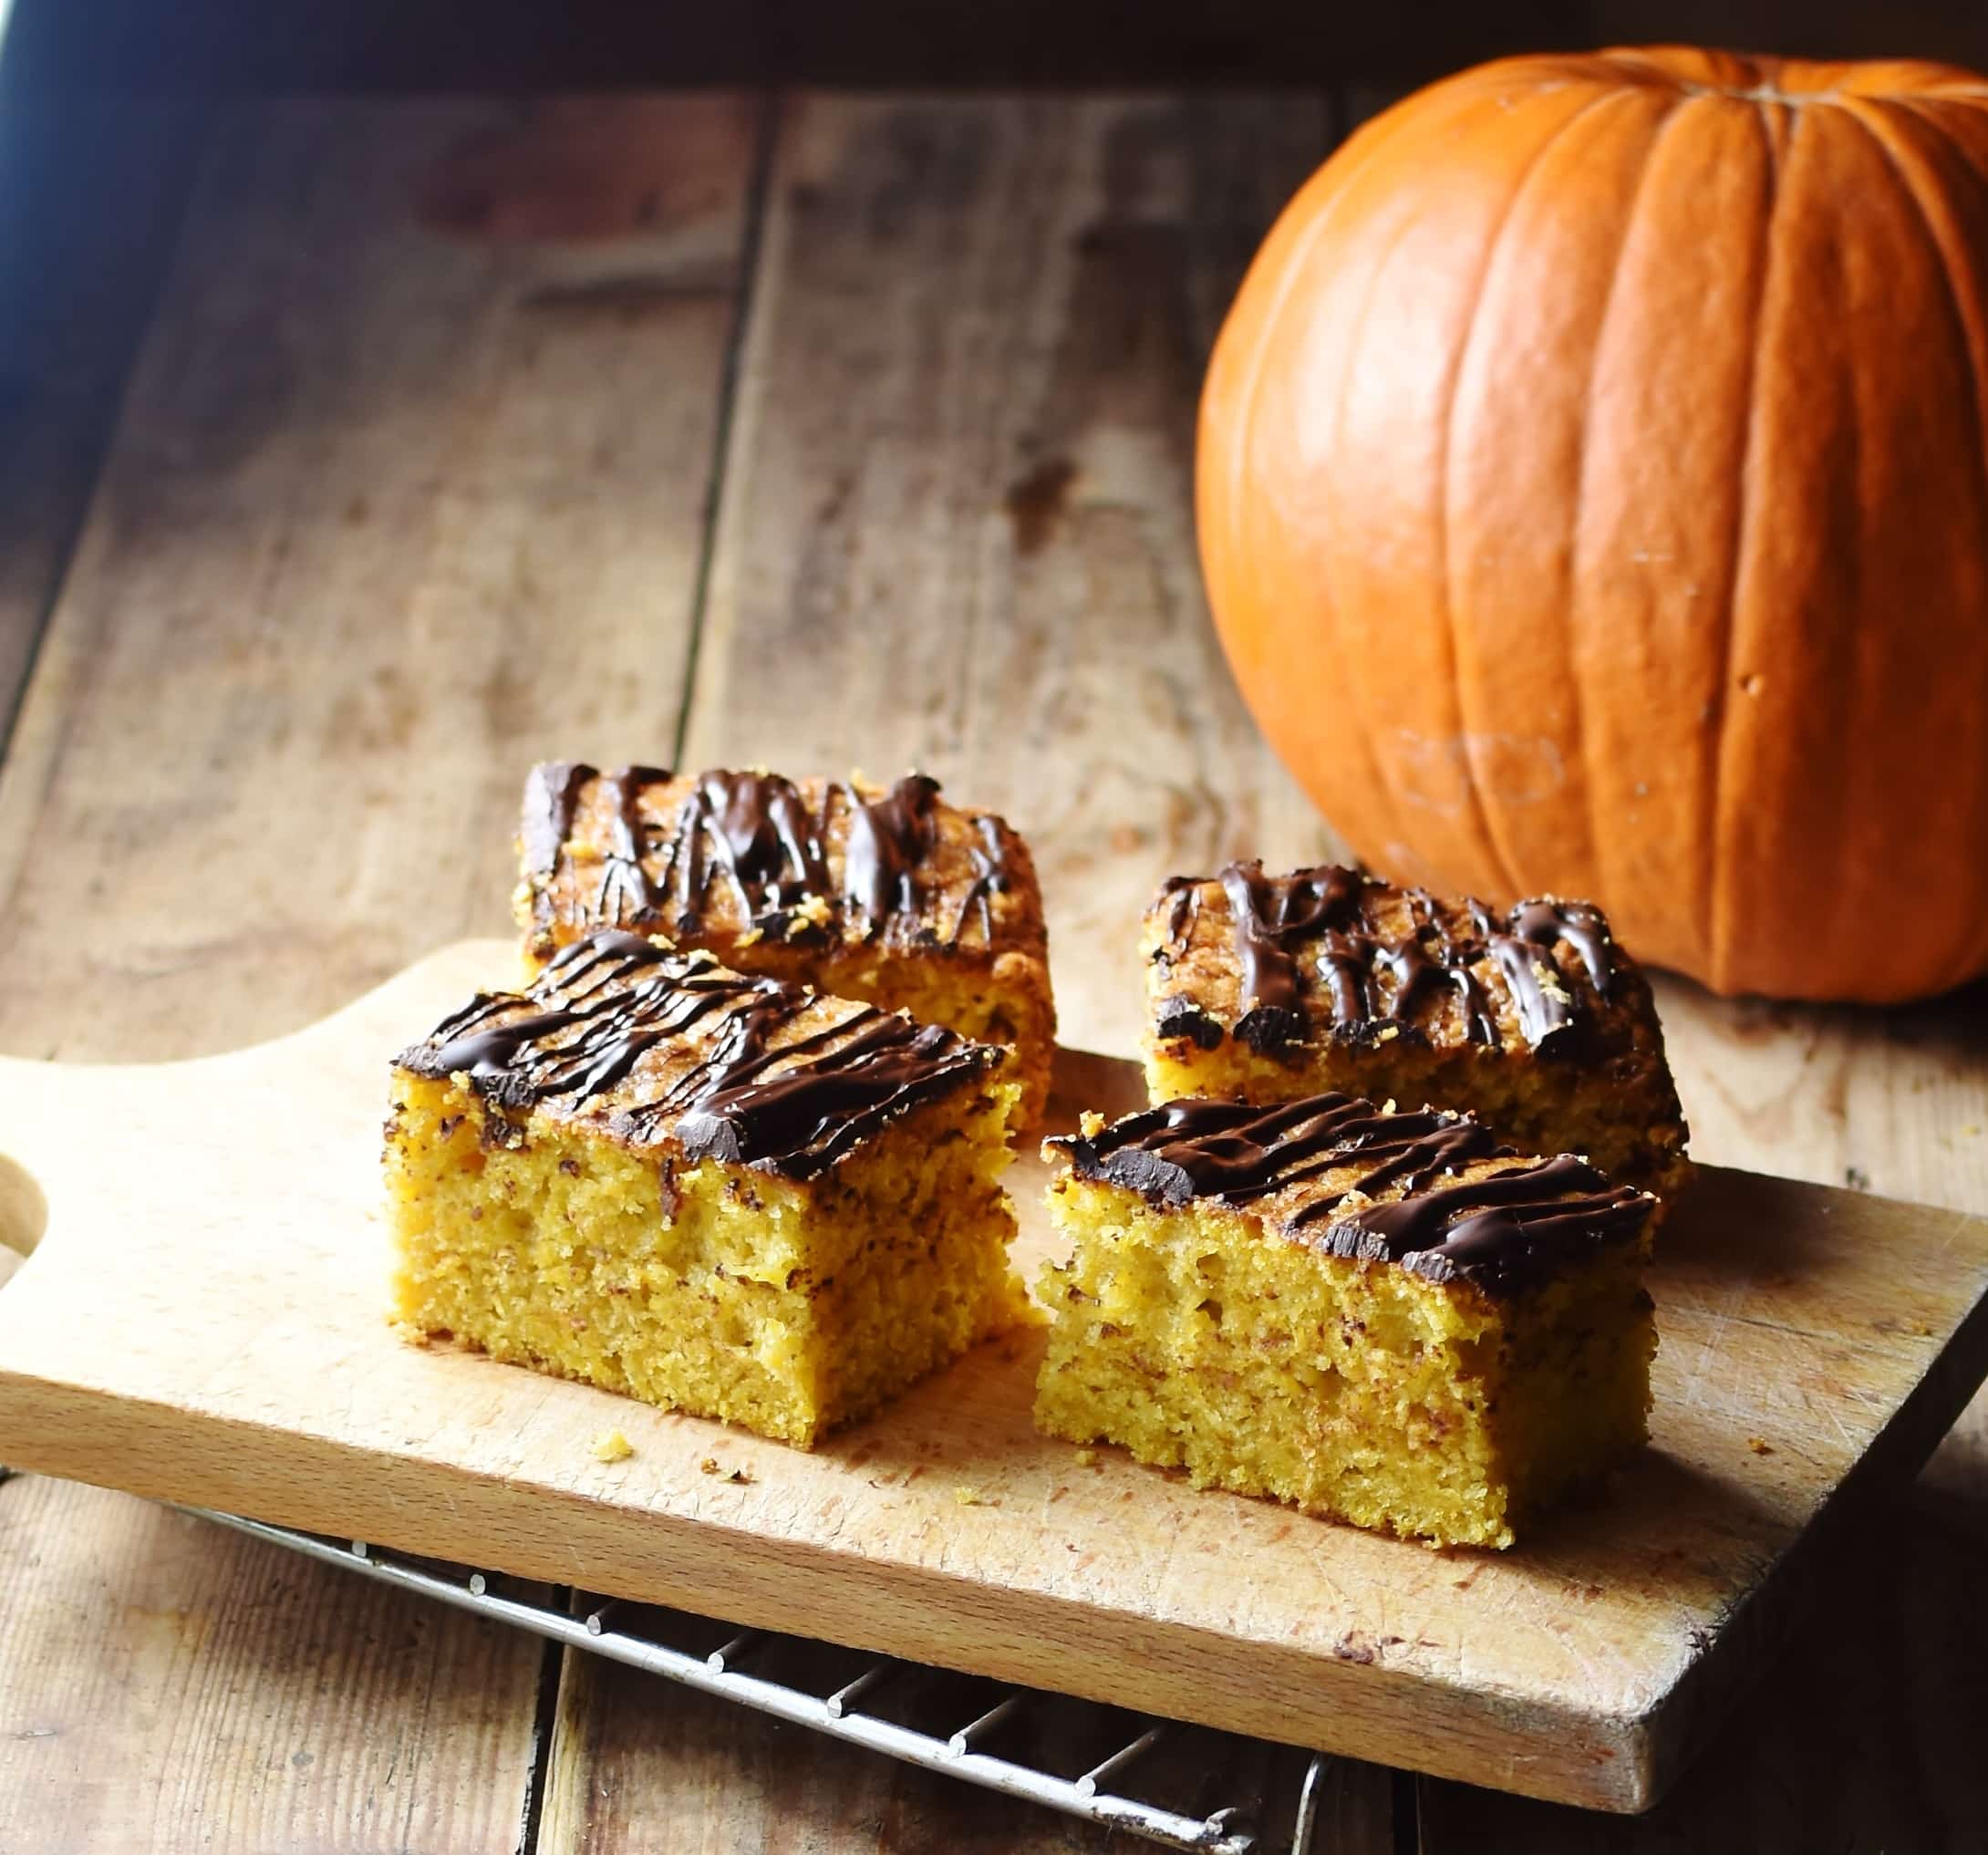 4 slices of pumpkin cake with chocolate drizzle on top of cutting board, with pumpkin in background.